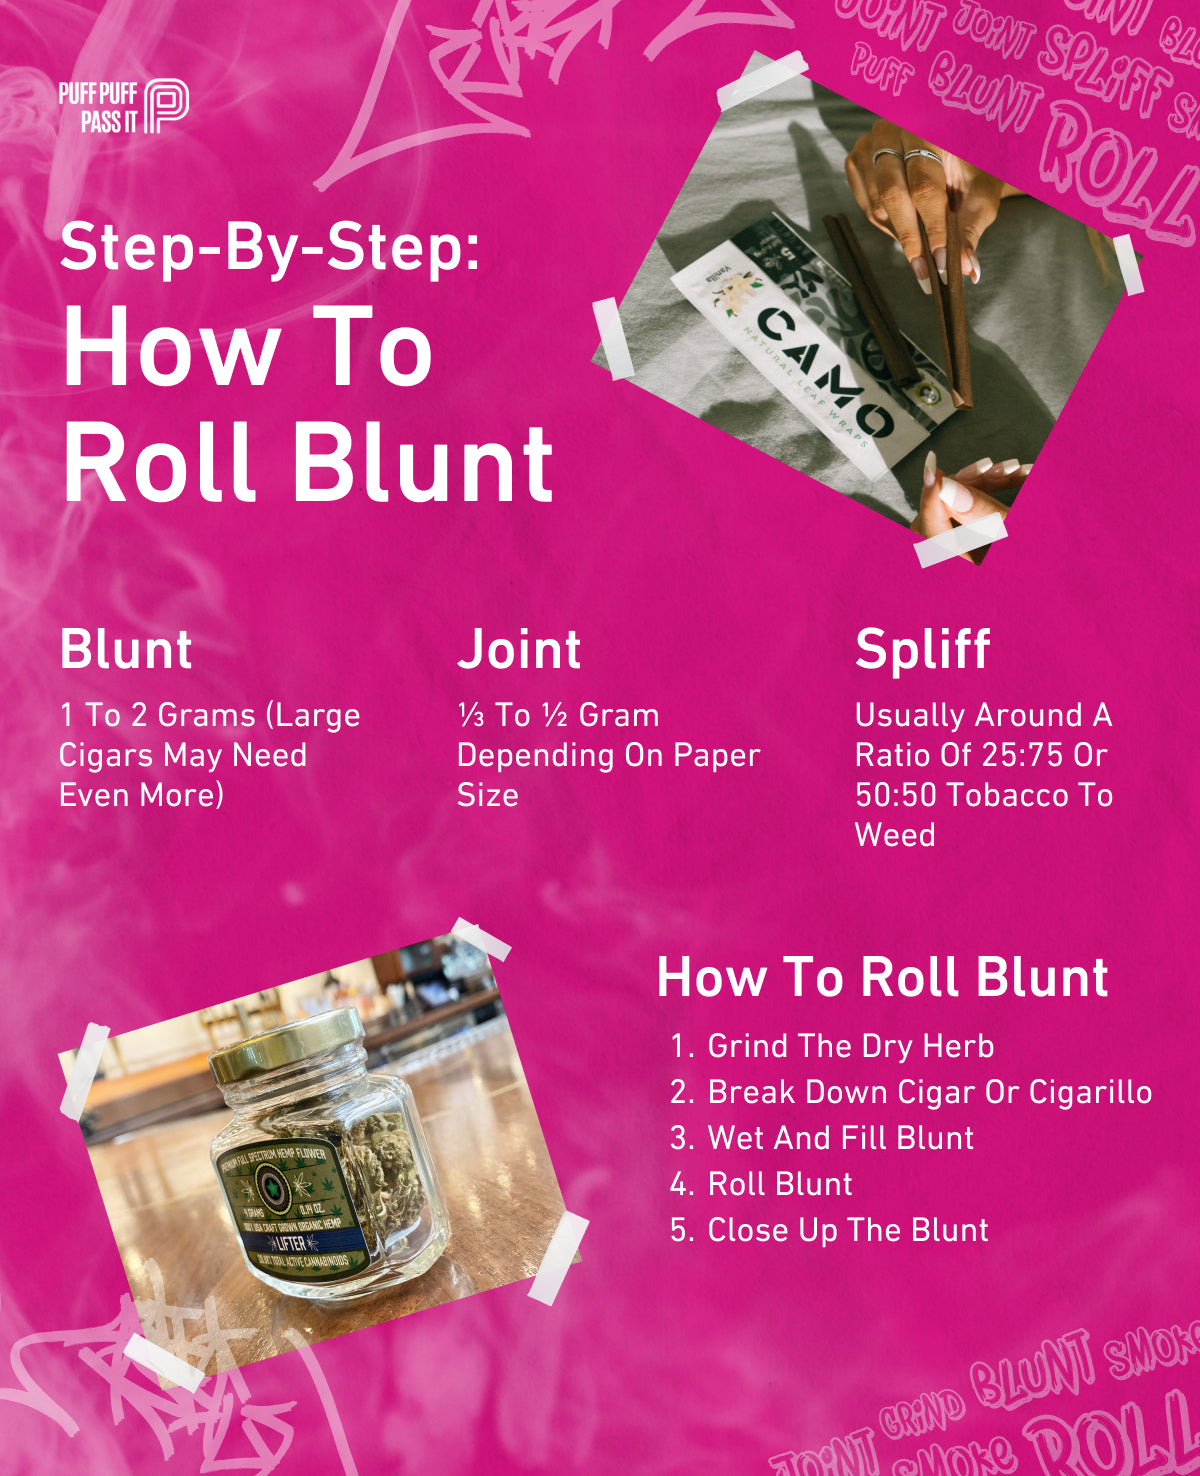 Step-by-Step: How to roll blunt